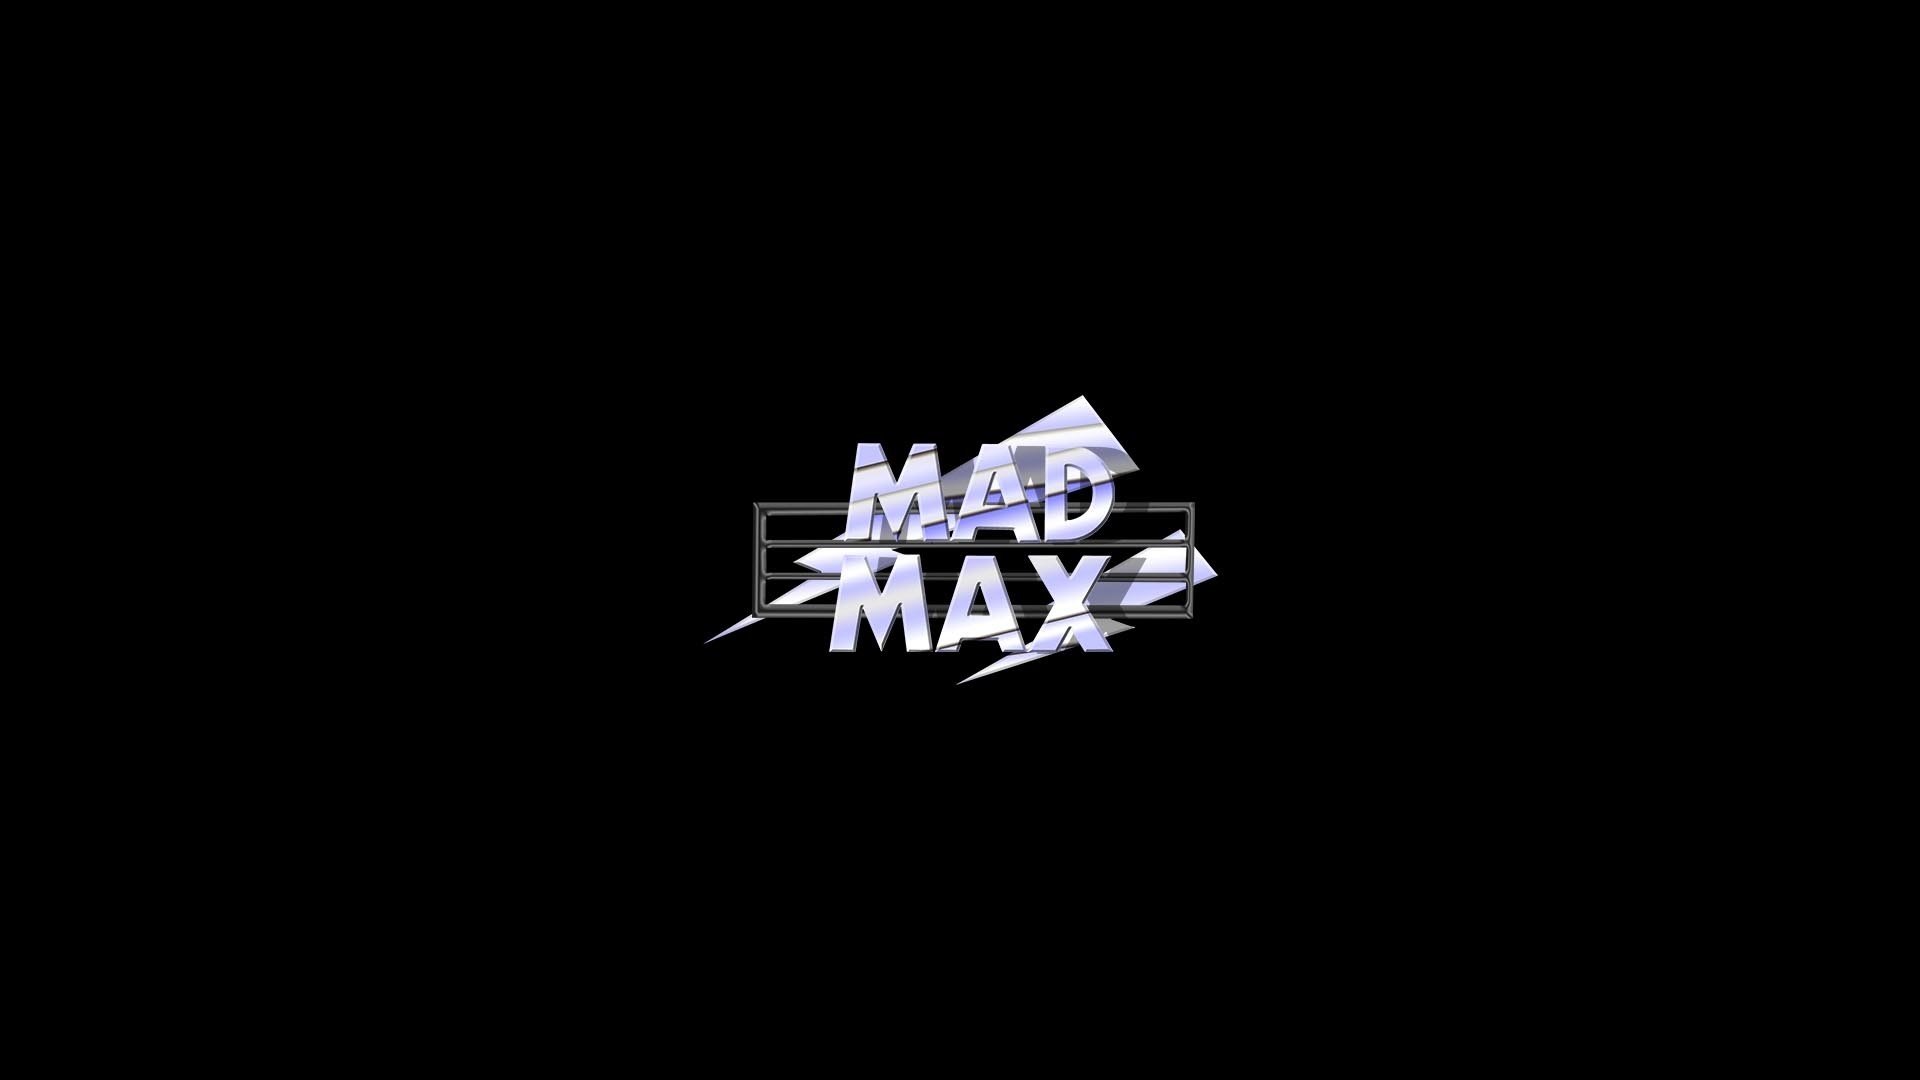 Mad Max Logo Wallpapers Hd Desktop And Mobile Backgrounds